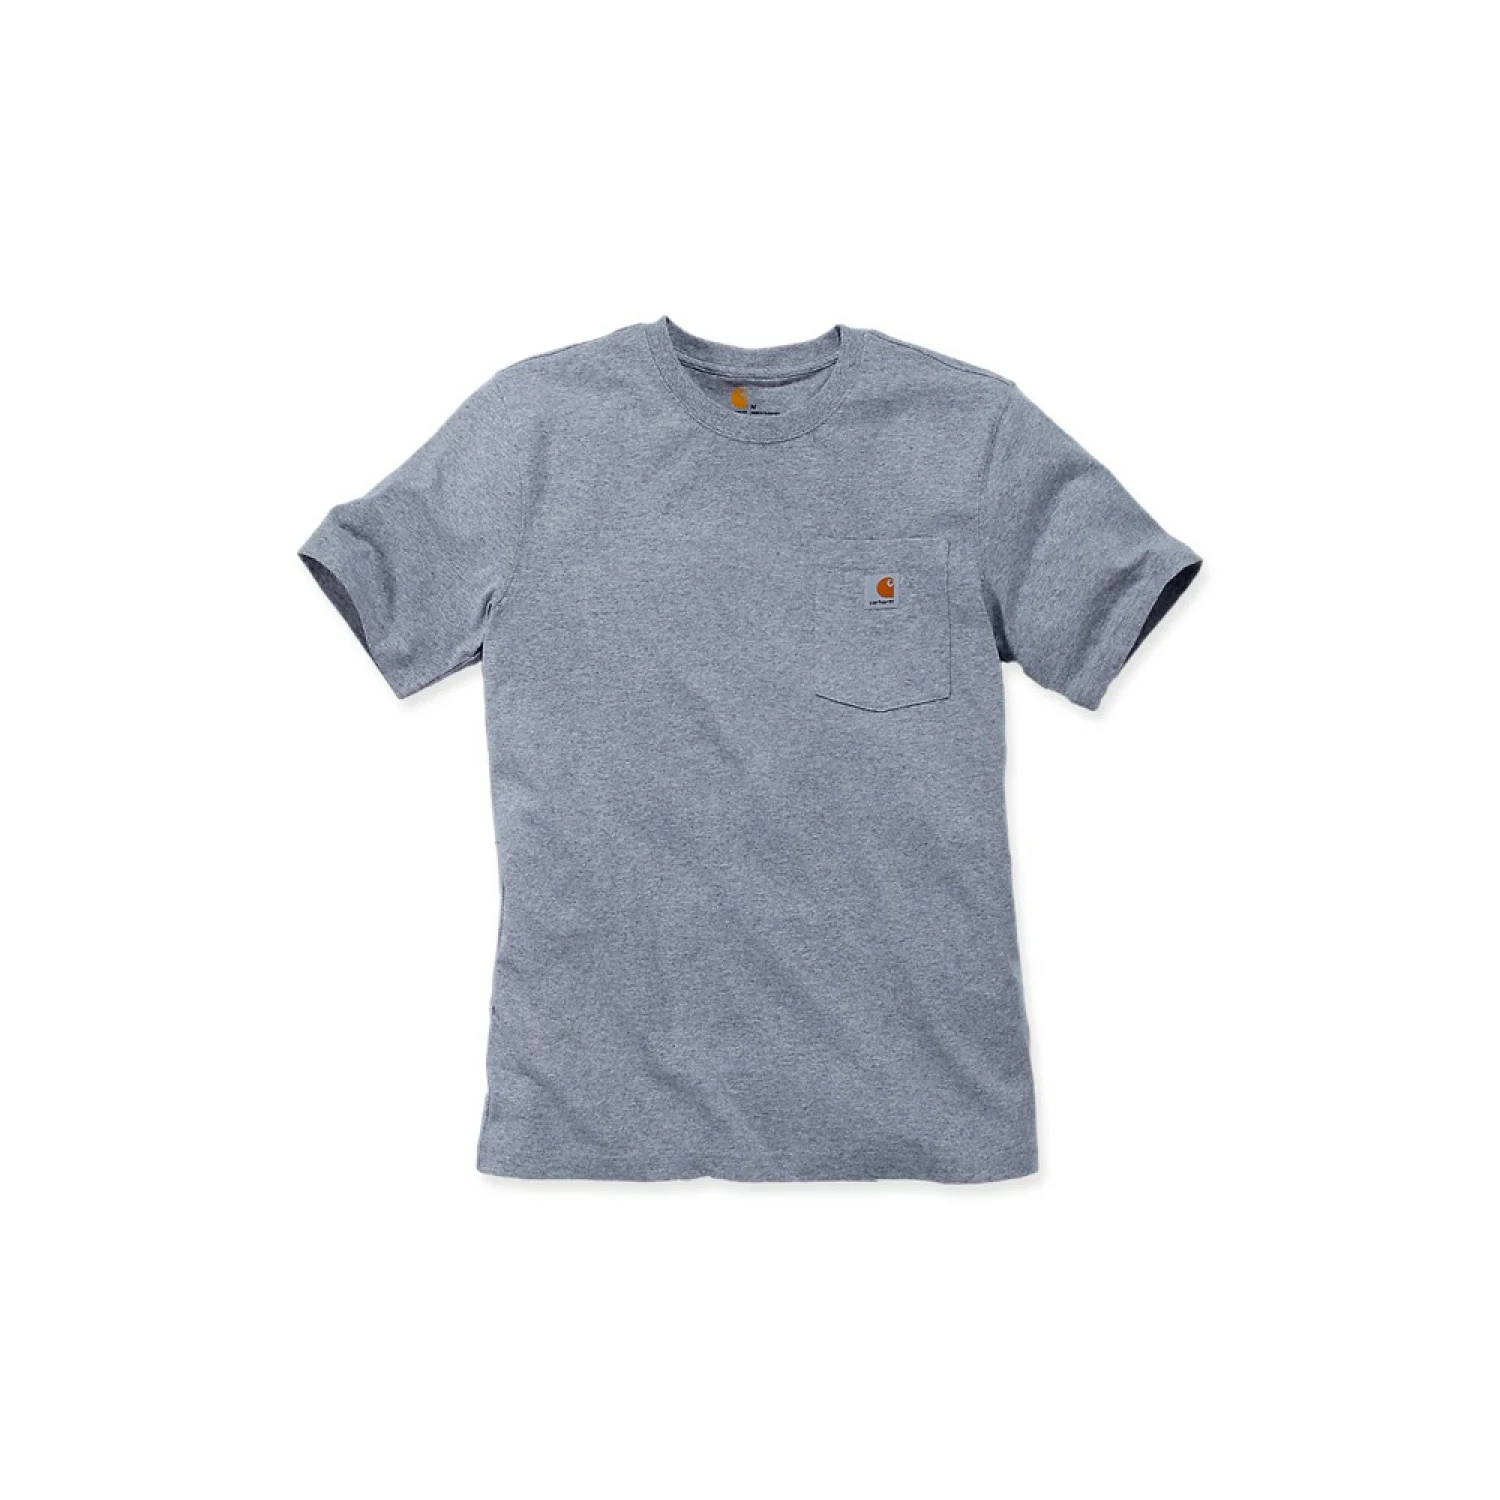 Carhartt 103296 Workwear Pocket T-Shirt - Relaxed Fit - Heather Grey - L-image